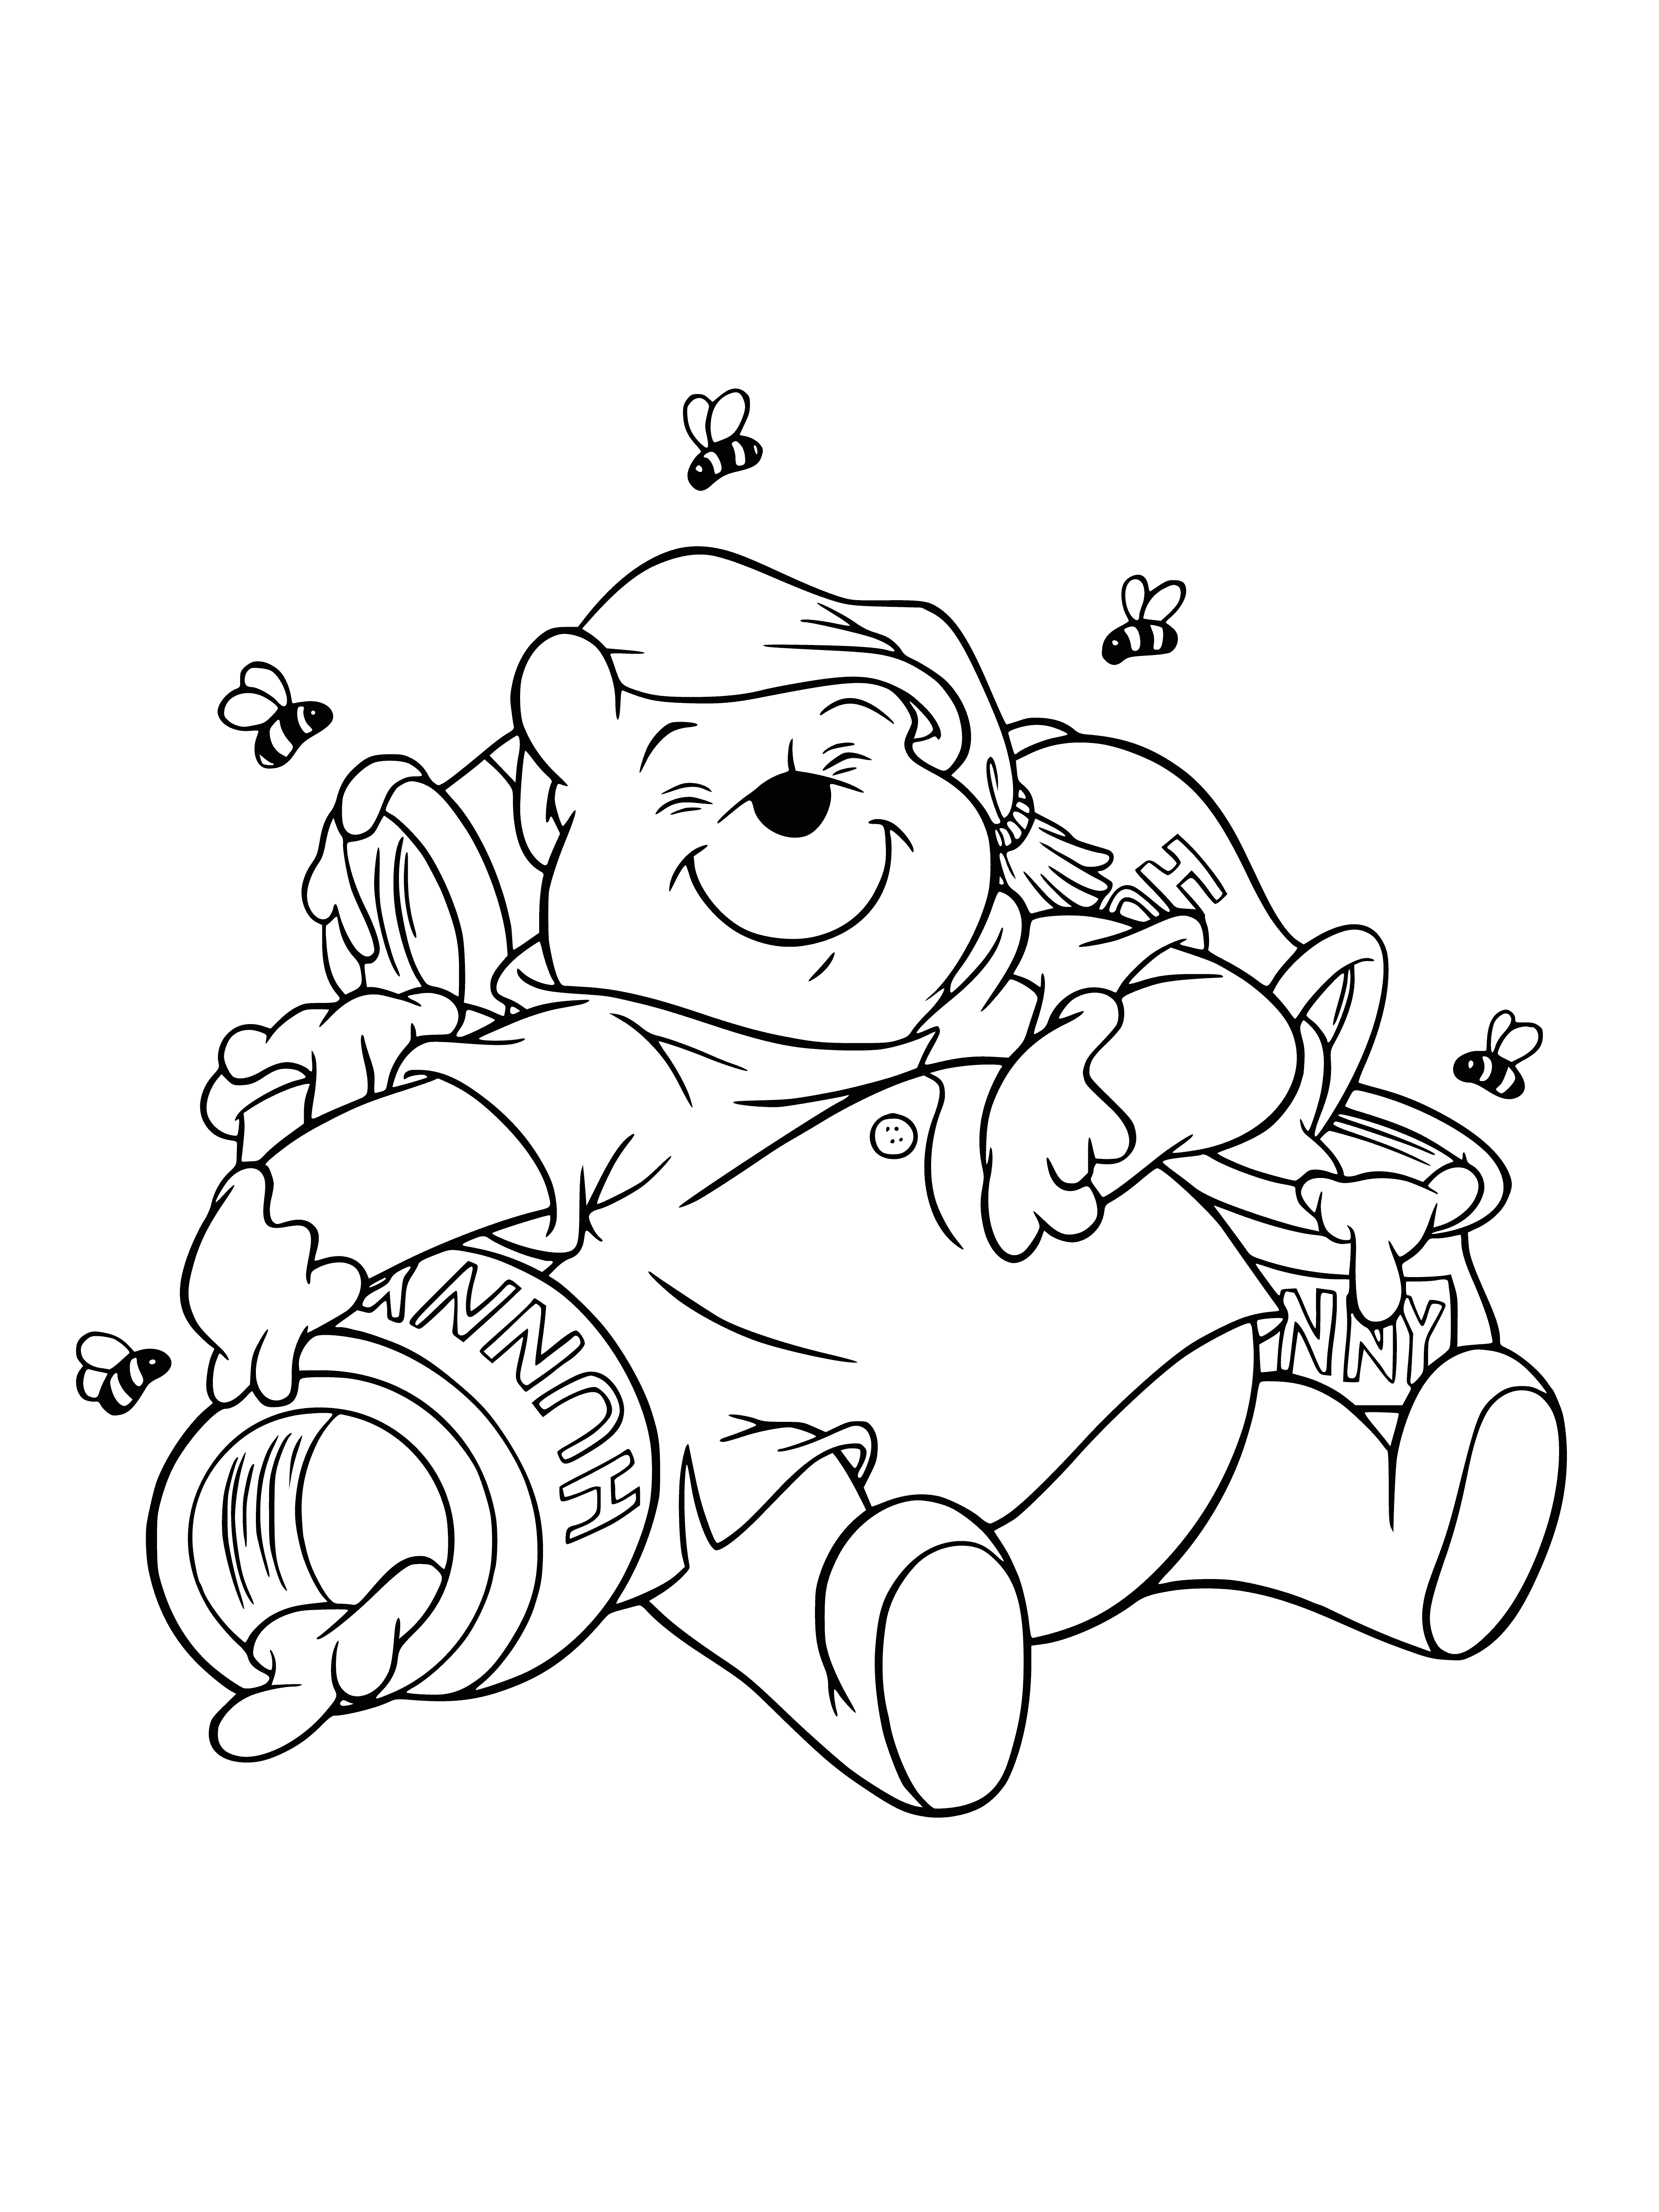 coloring page: Winnie the Pooh is a teddy bear enjoying a day with his bee friend and honey pot in a field of flowers.